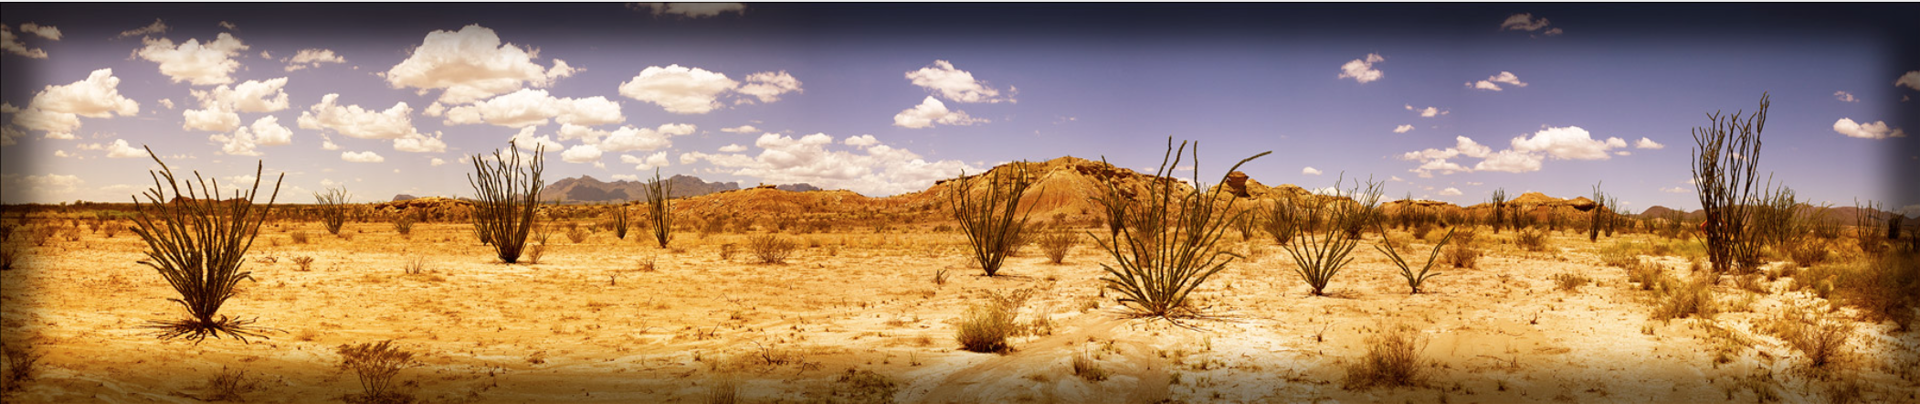 Ocotillo Panoramic by James H. Evans